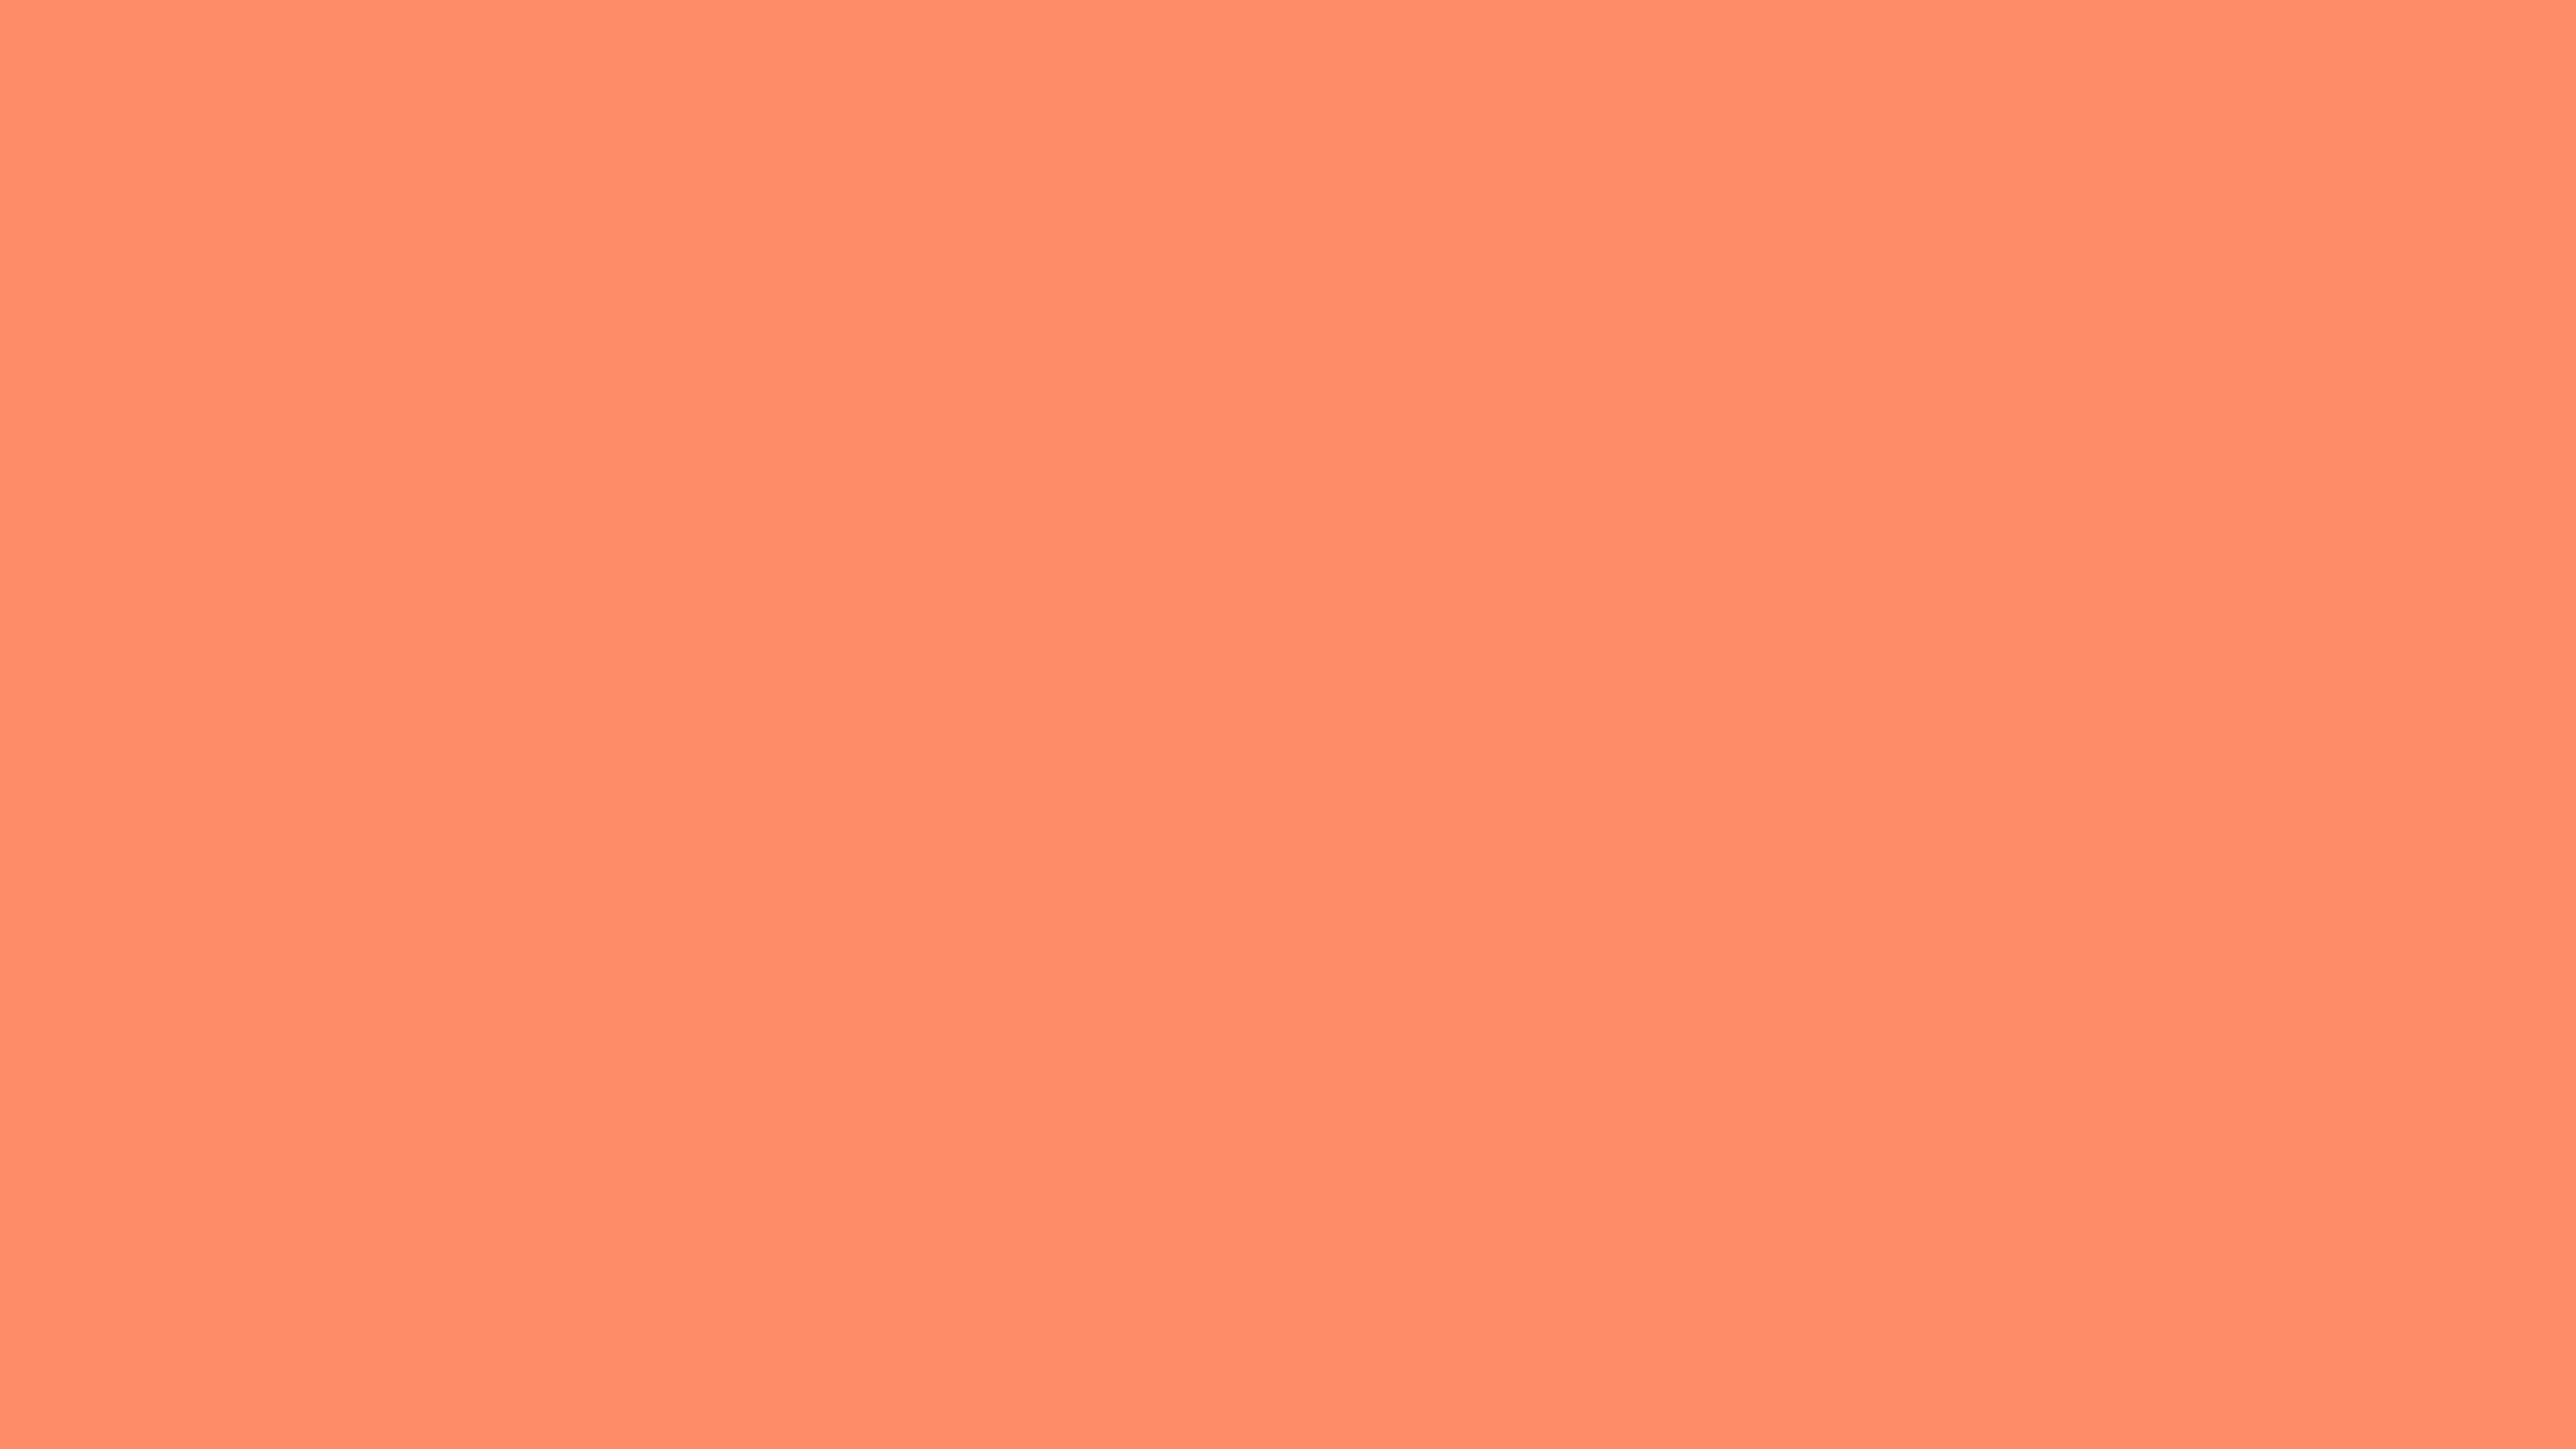 7680x4320 Salmon Solid Color Background